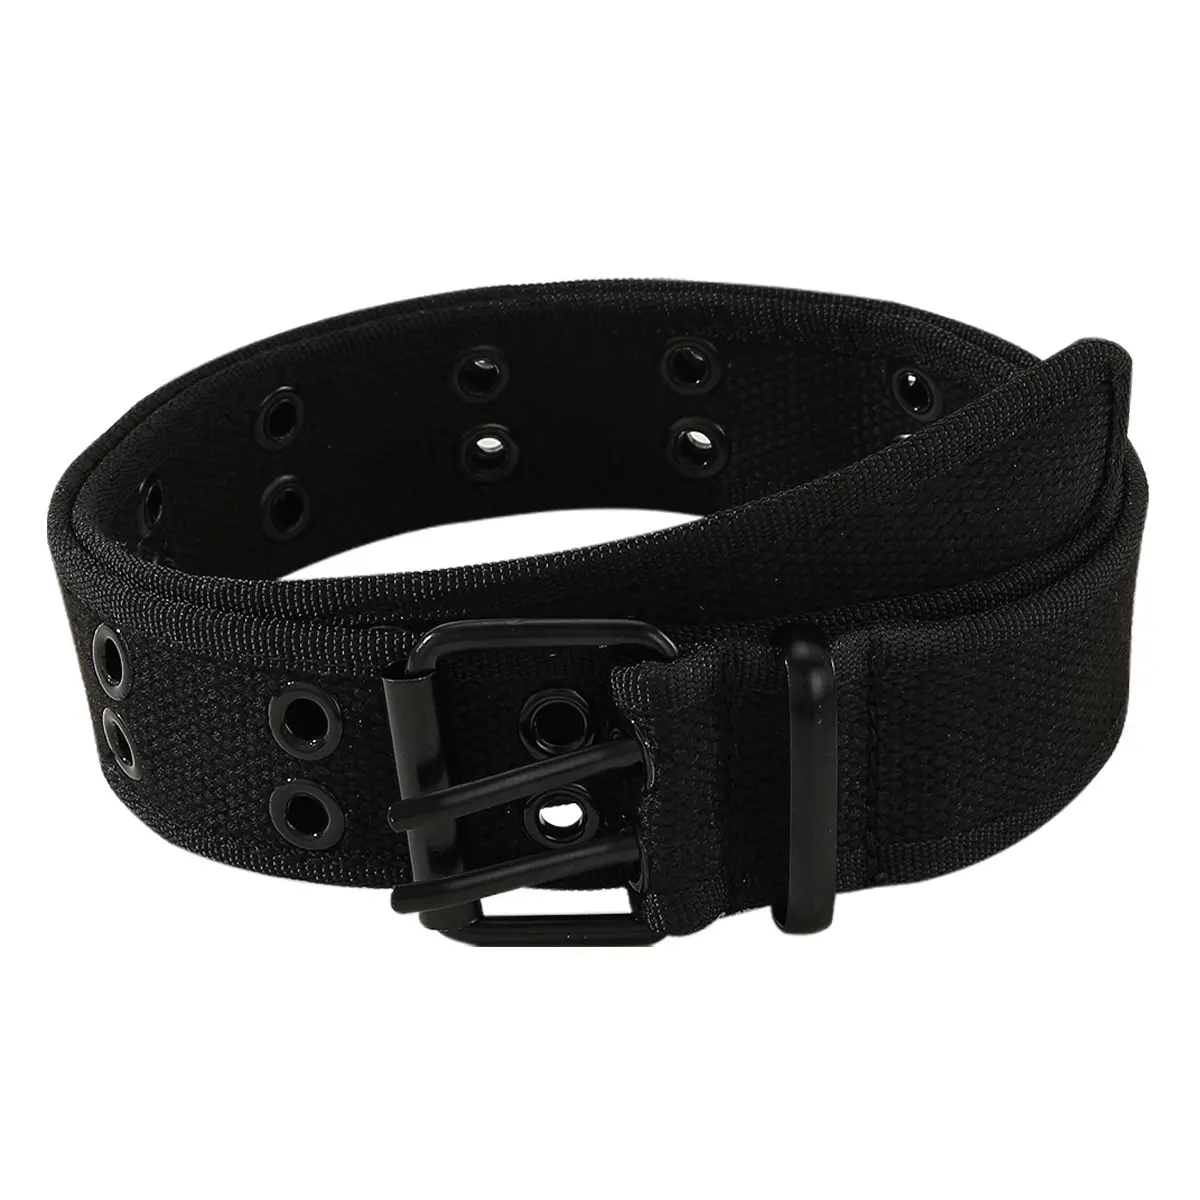 The Canvas Belt Featuring A Double Pin Buckle Design Casual Wear Punk Style Outfits With double-breasted details